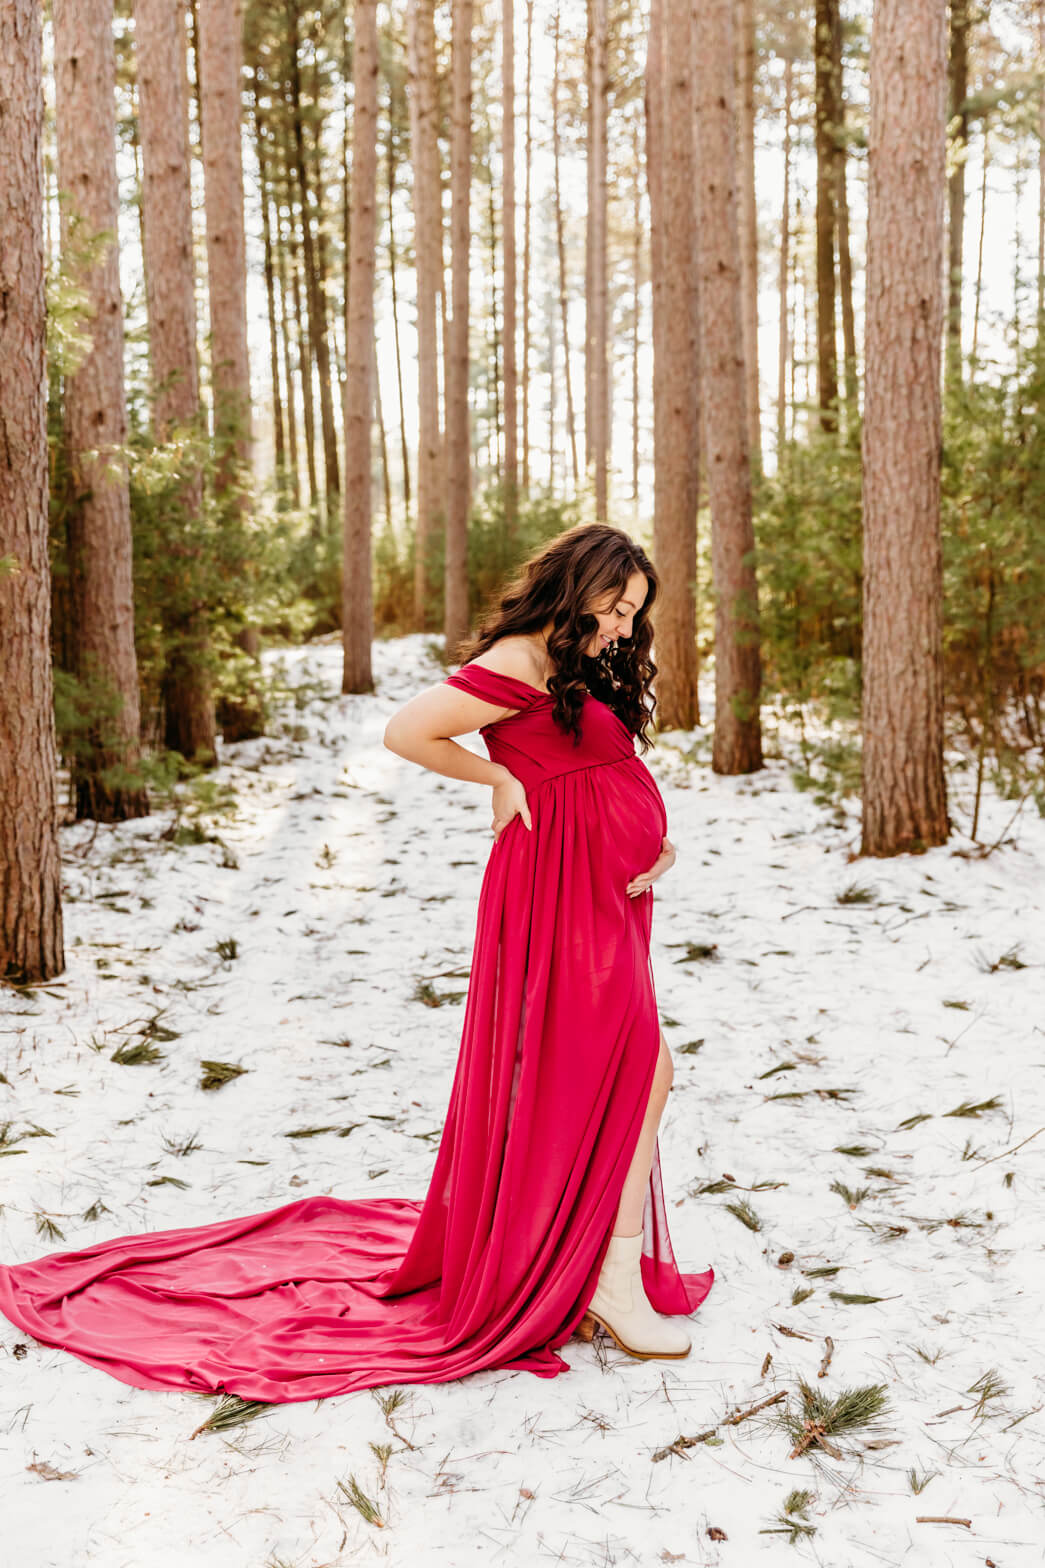 A mom to be in white boots and a pink maternity gown stands in a snowy pine forest froedtert birth center